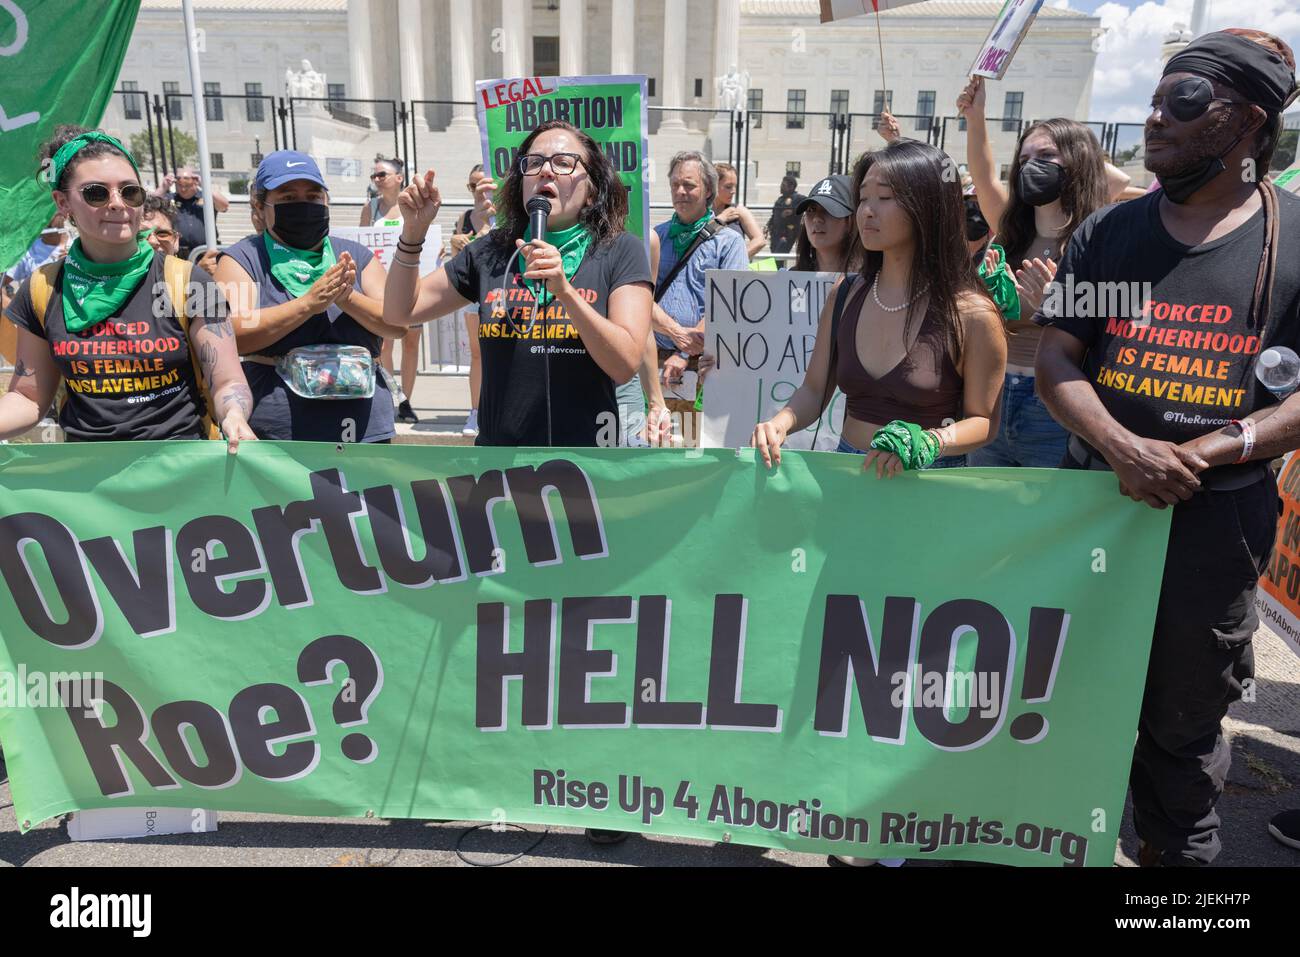 WASHINGTON, D.C. – June 25, 2022: Abortion rights demonstrators rally near the Supreme Court of the United States. Stock Photo